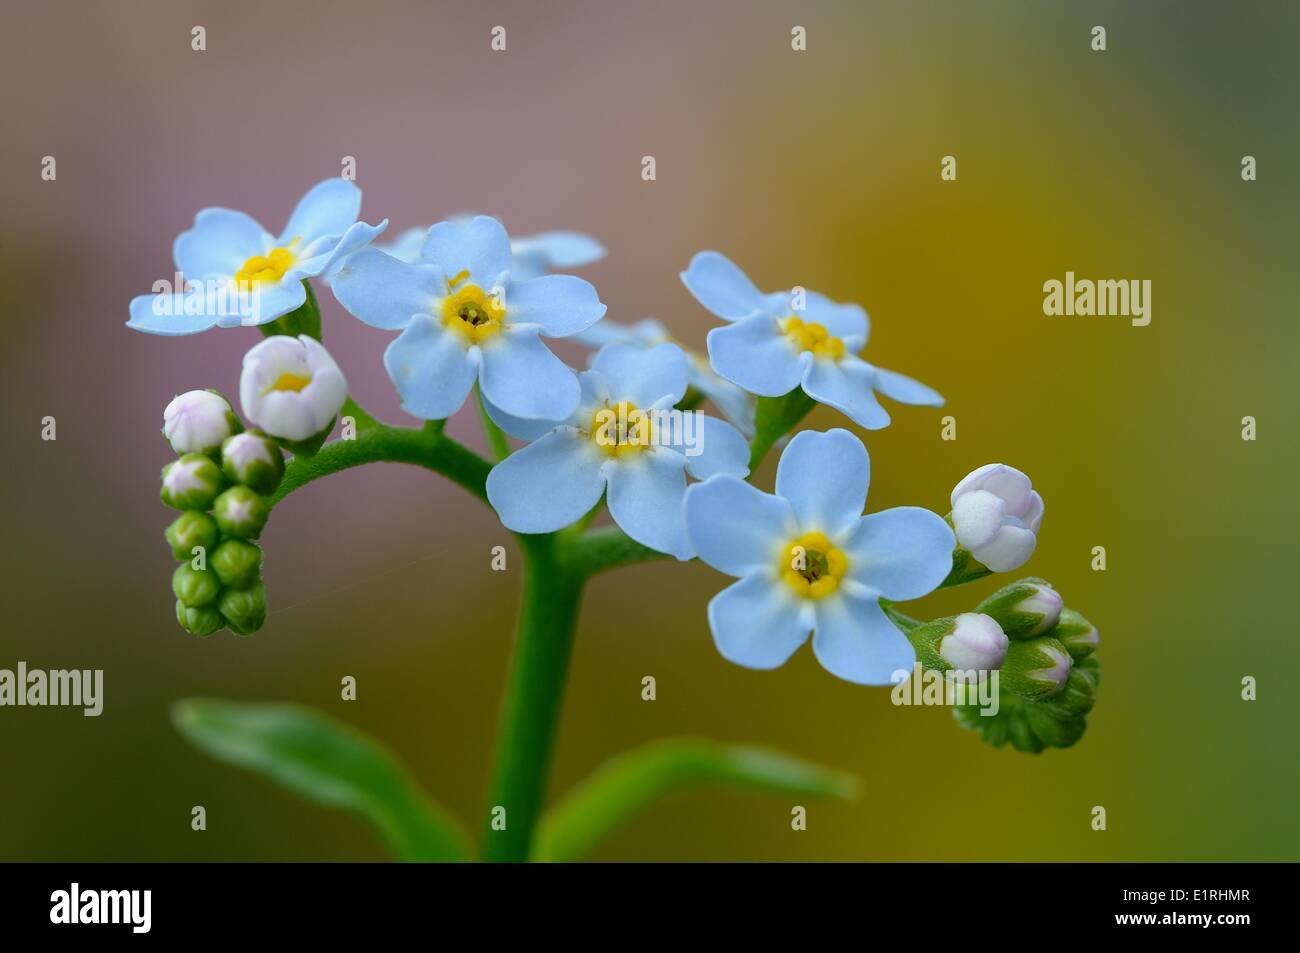 Water Forget-me-not flowers in close-up Stock Photo